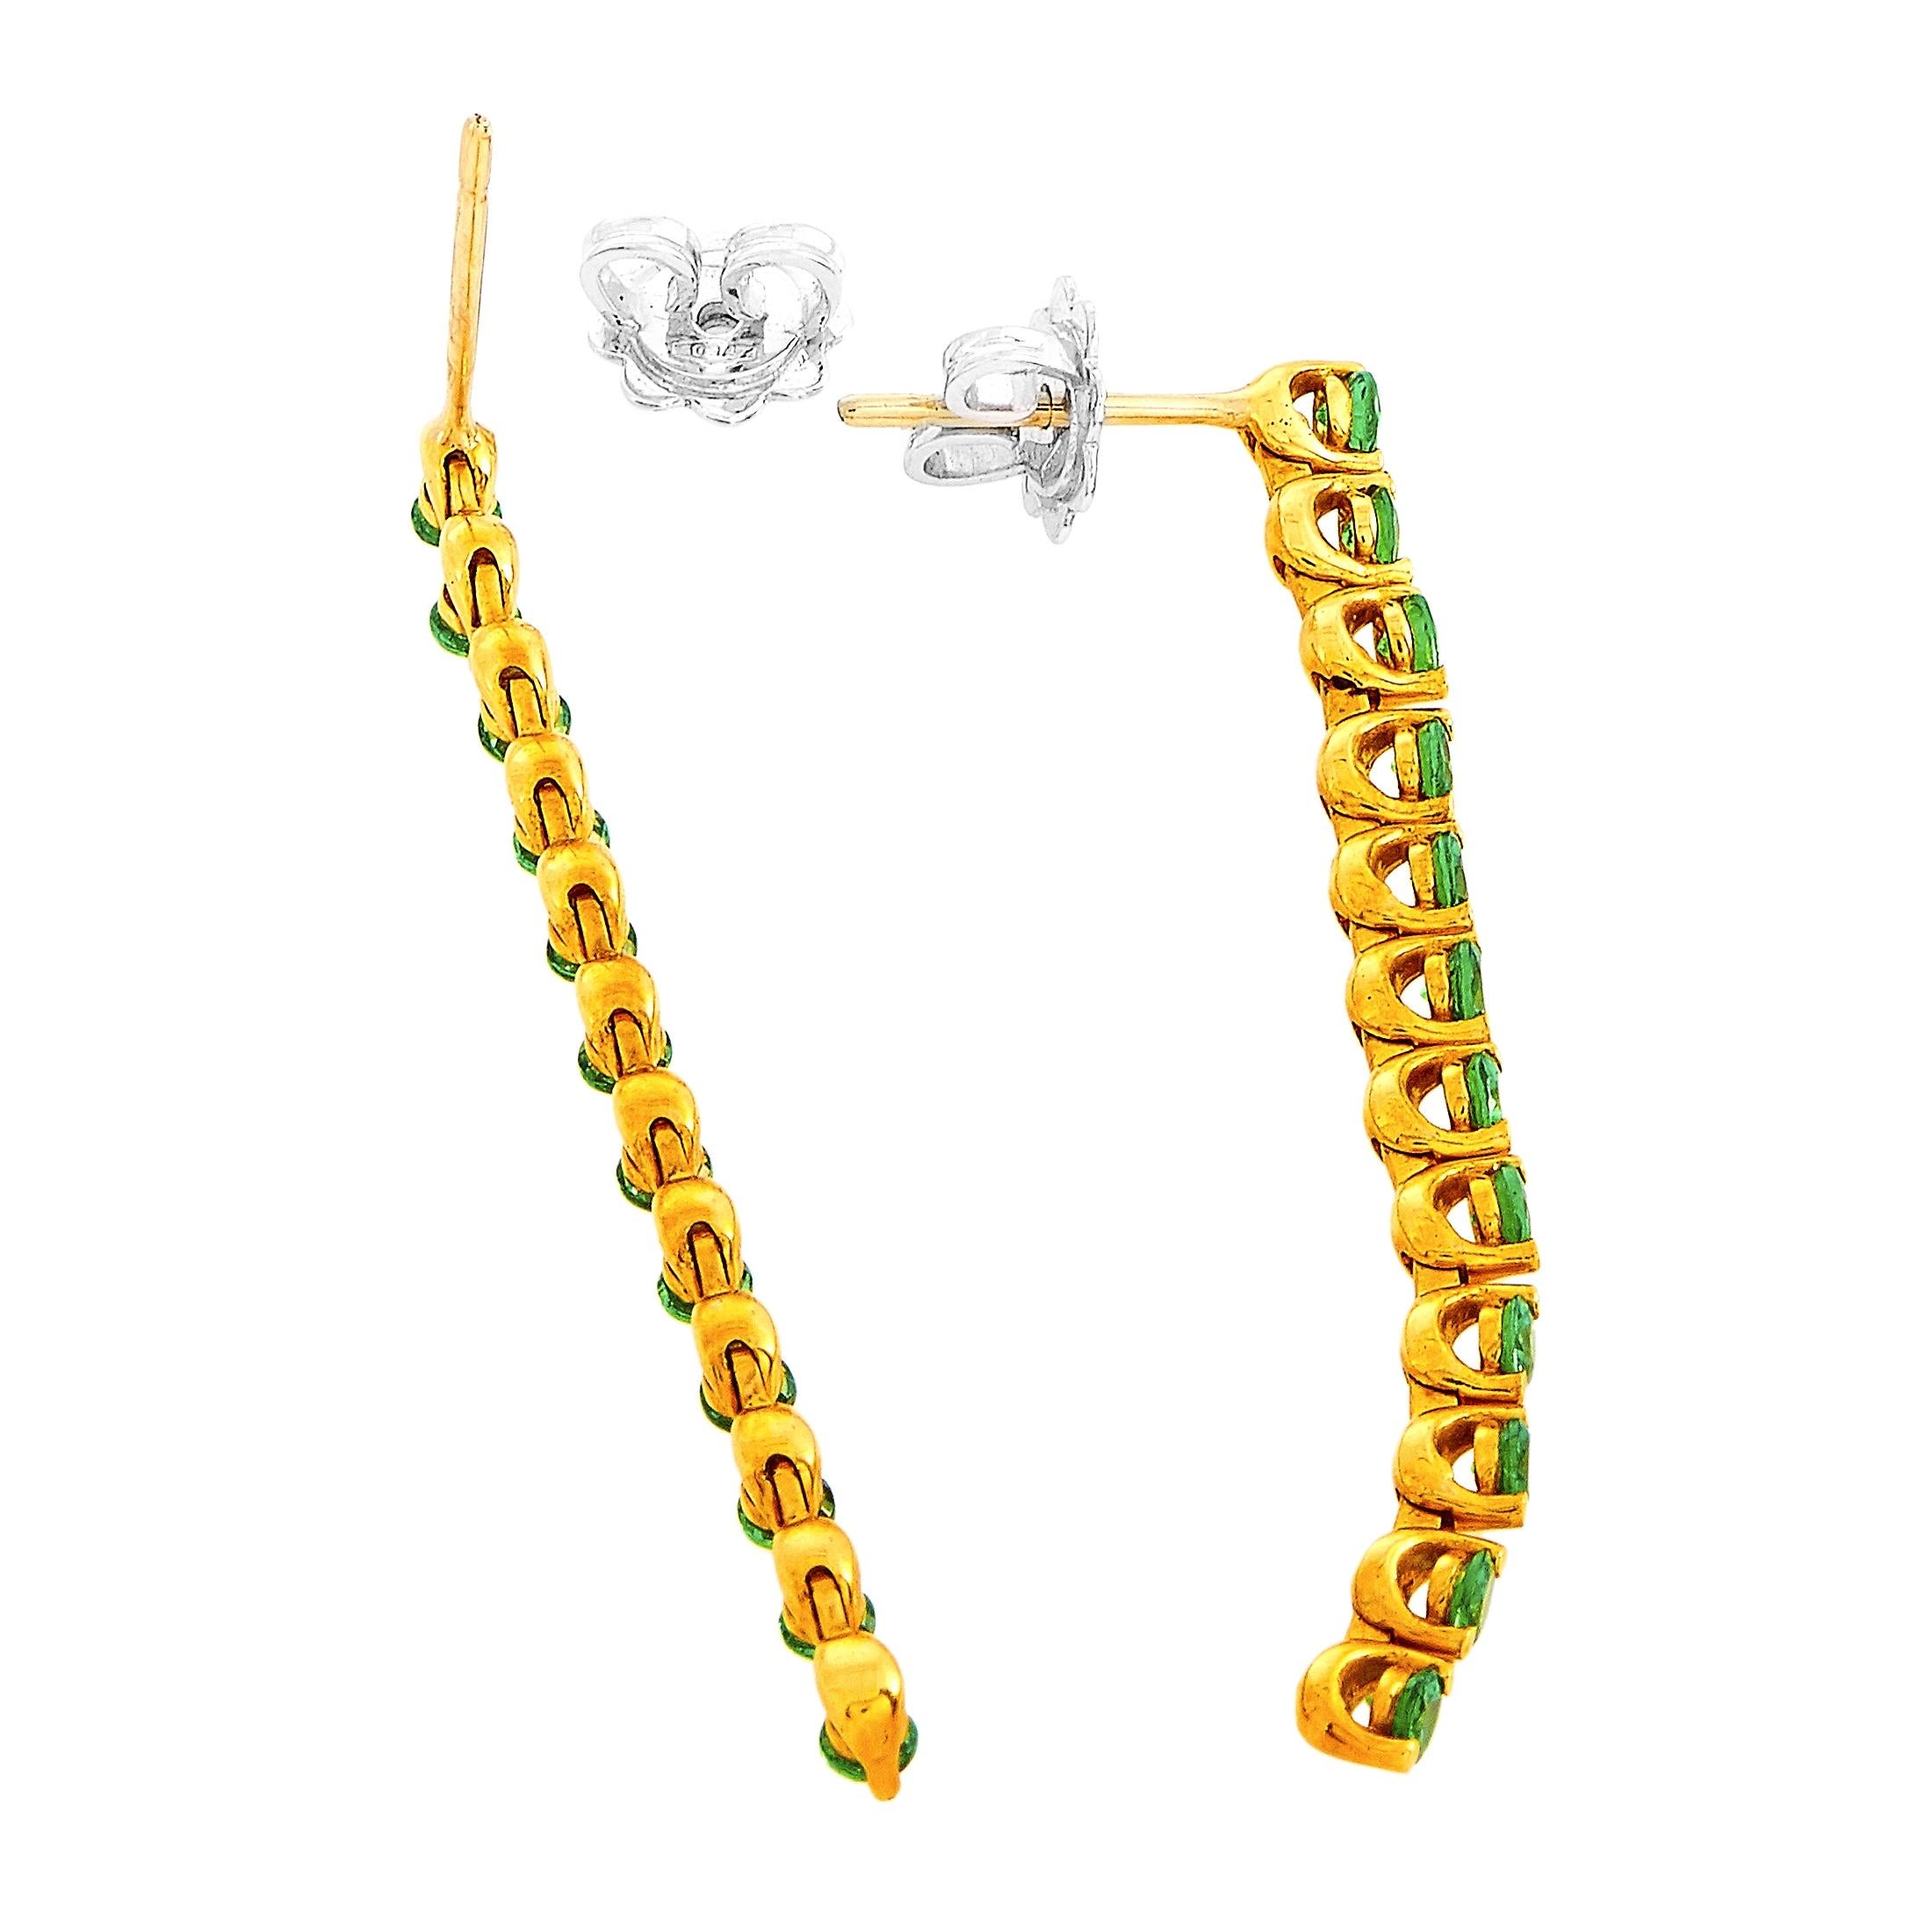 These Oro Trend earrings are made out of 18K yellow gold and tsavorites that total 1.00 carat. The earrings measure 2” in length and 0.15” in width and each of the two weighs 2.9 grams.

The pair is offered in brand new condition and includes a gift